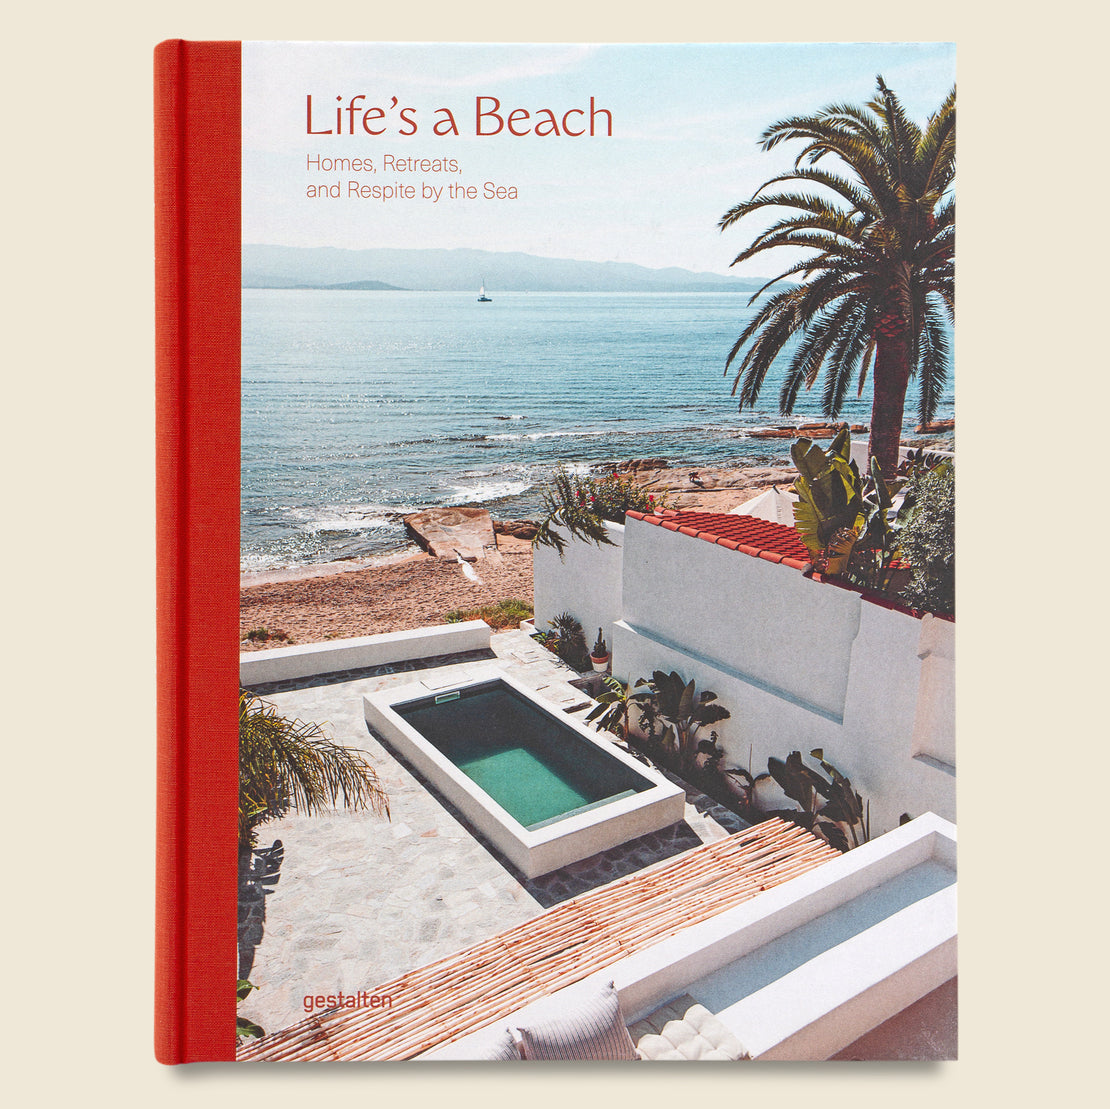 Bookstore Life's a Beach: Homes, Retreats, and Respite by the Sea